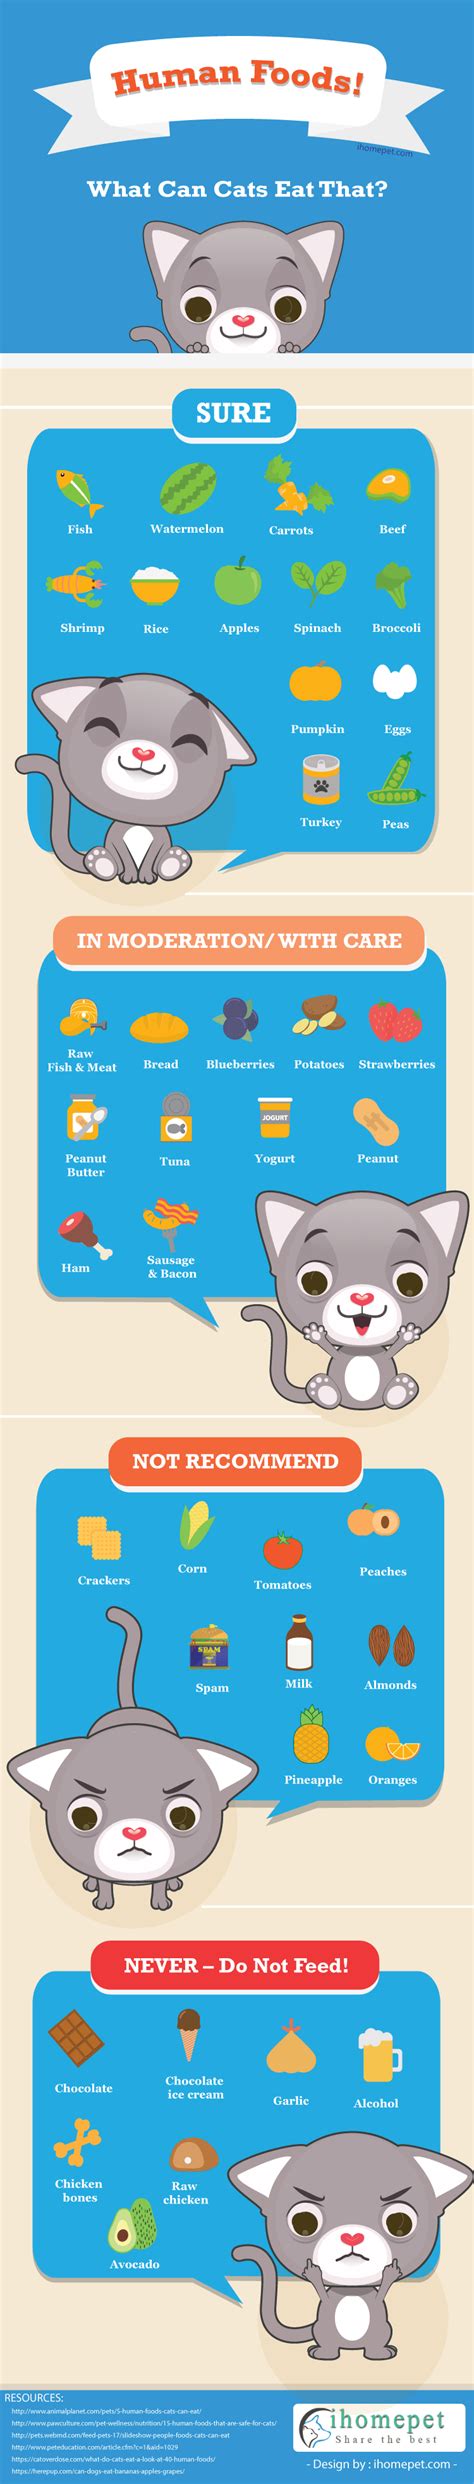 Shrimp is also a good cat treat for them. Infographic Human Foods - What Can Cats Eat Besides Cat ...